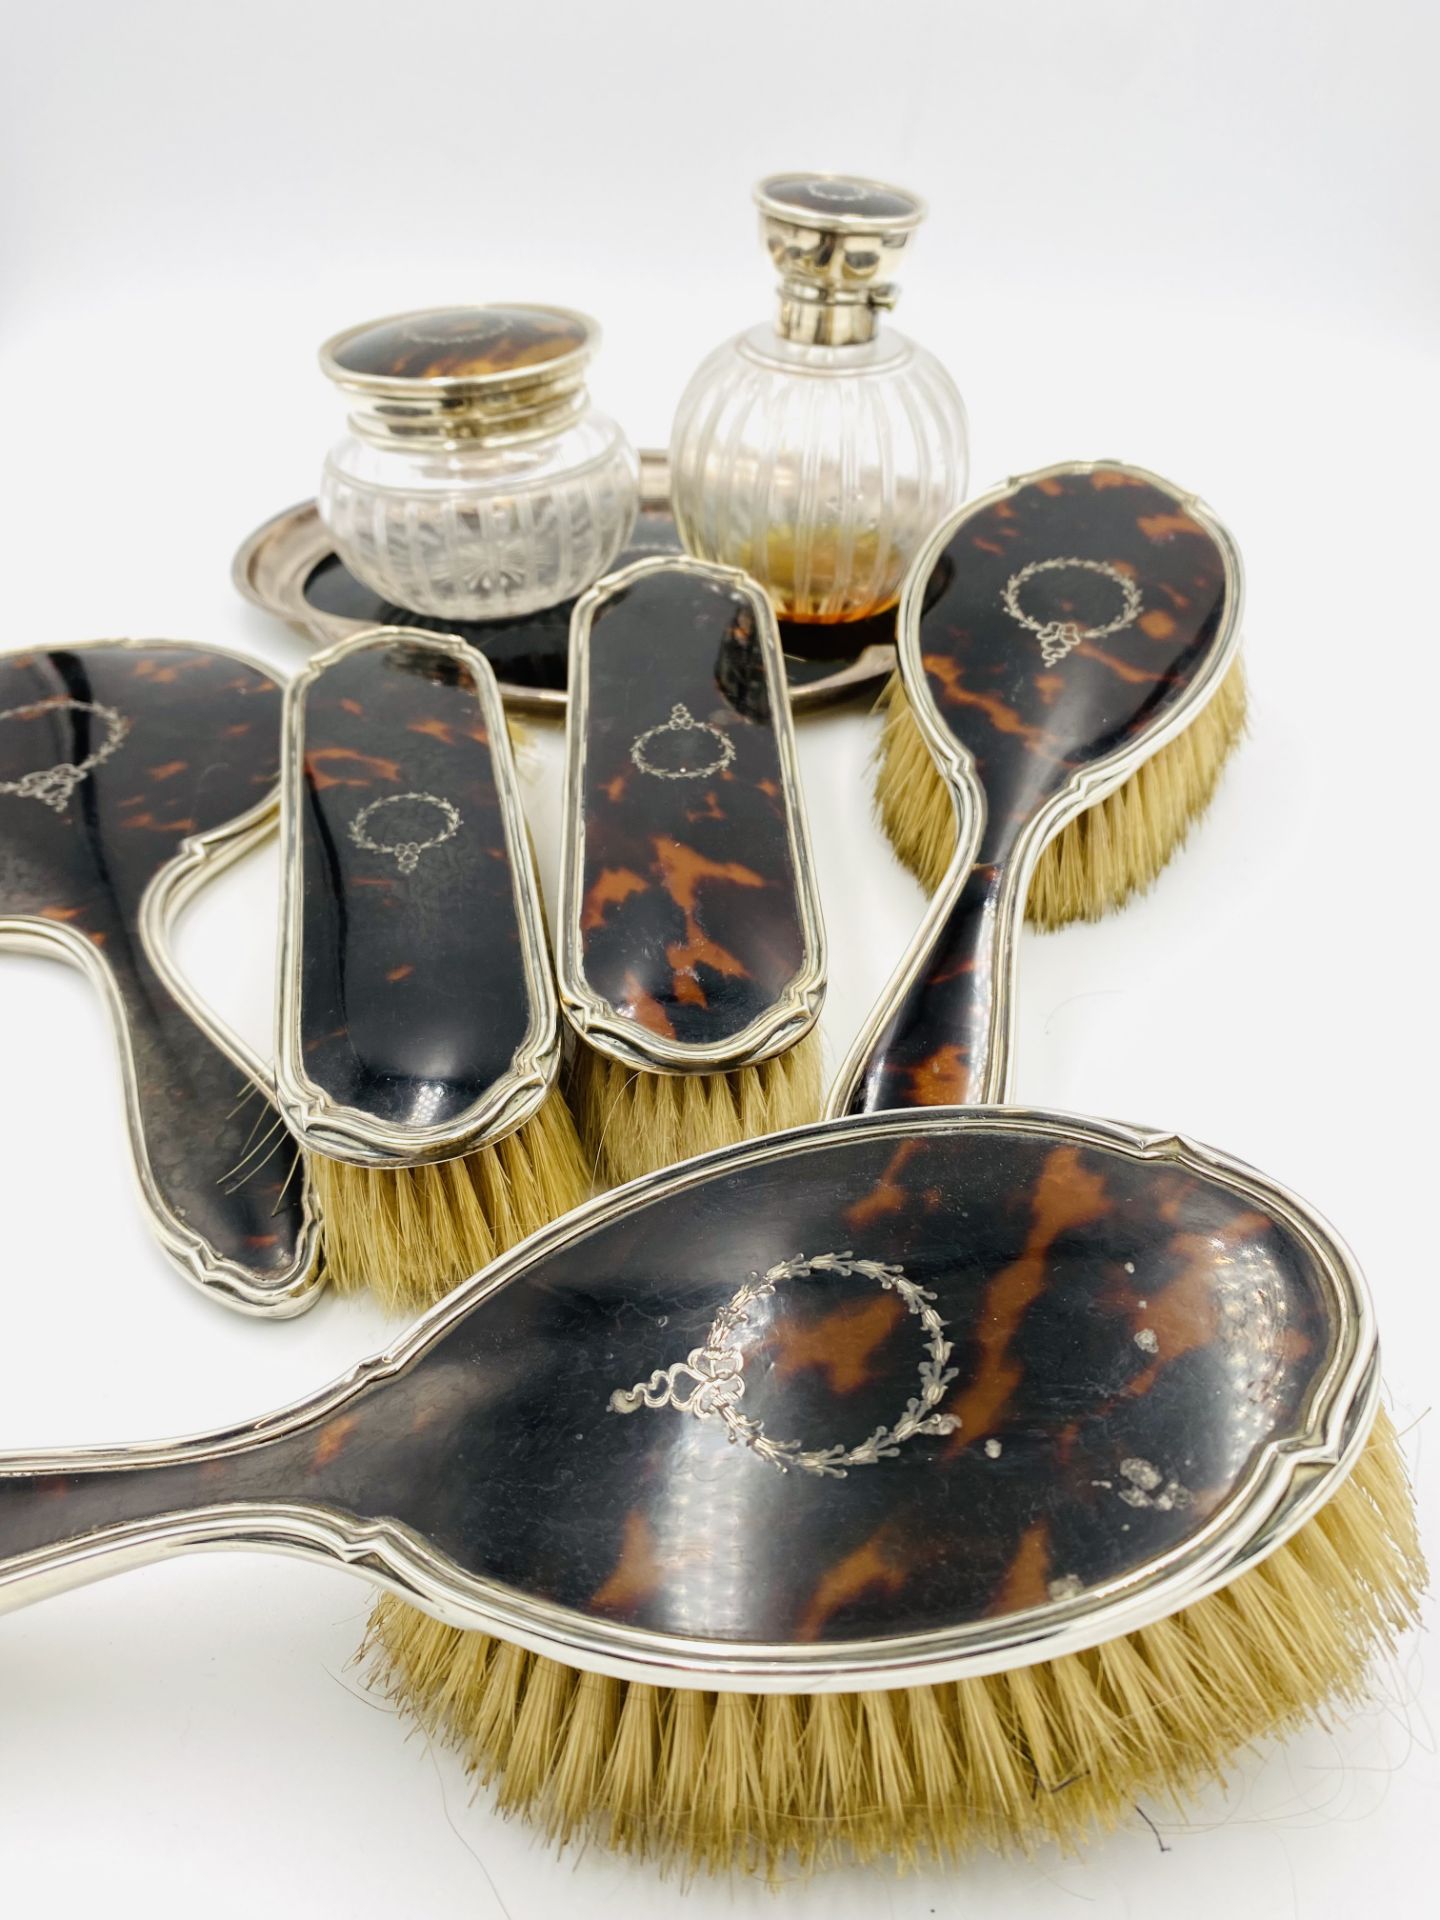 Silver and tortoiseshell dressing table set - Image 3 of 7